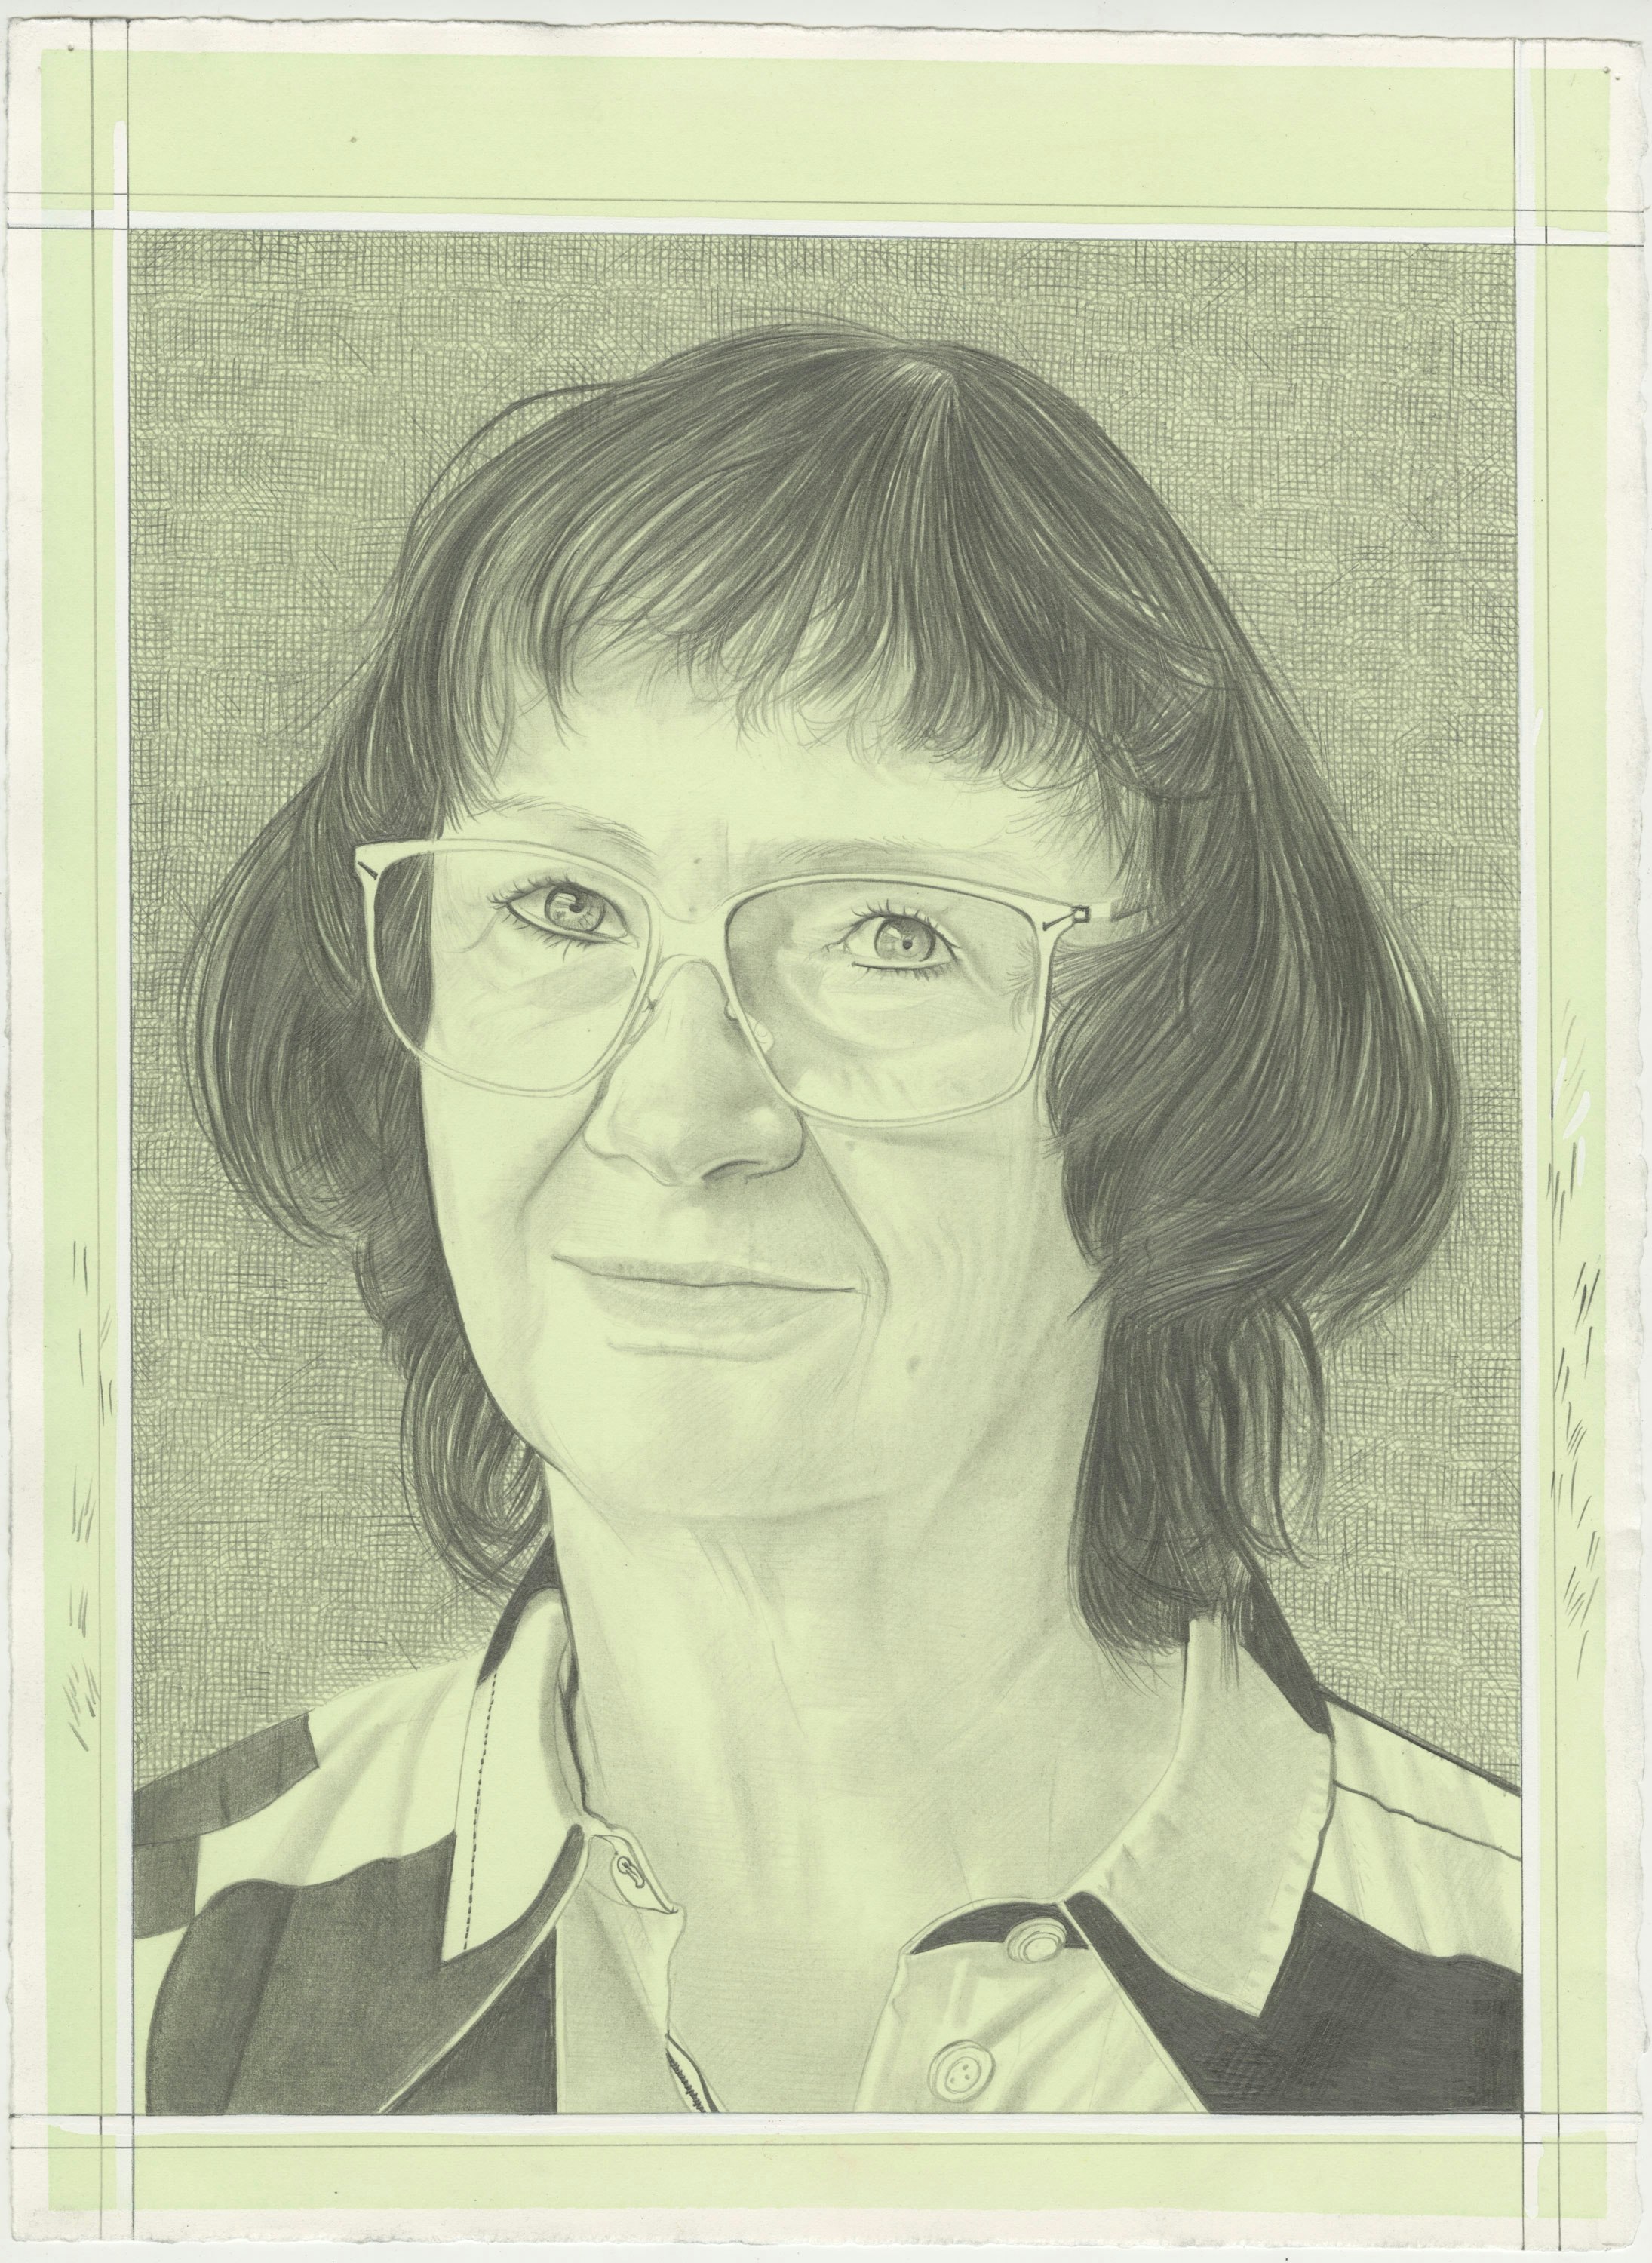 Portrait of Jo Smail, pencil on paper by Phong H. Bui.